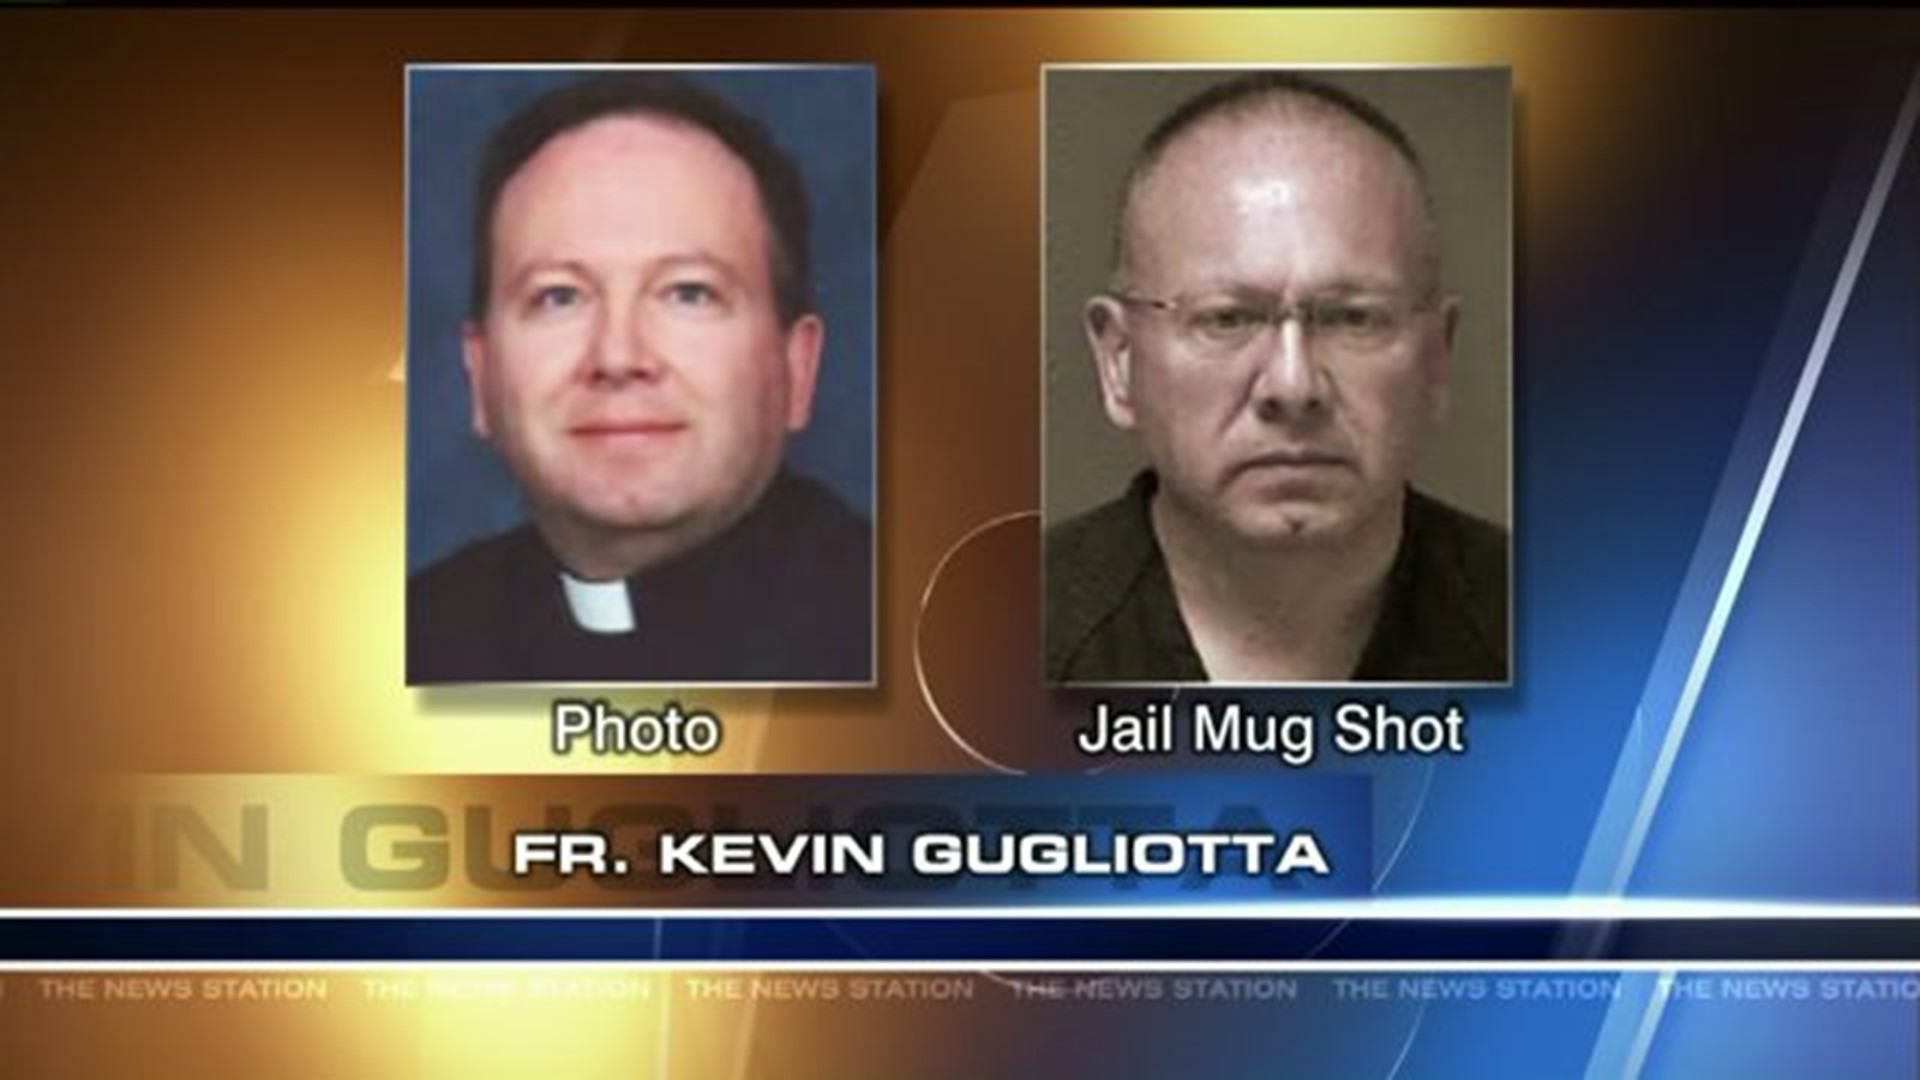 Catholic Priest Arrested on Child Porn Charges